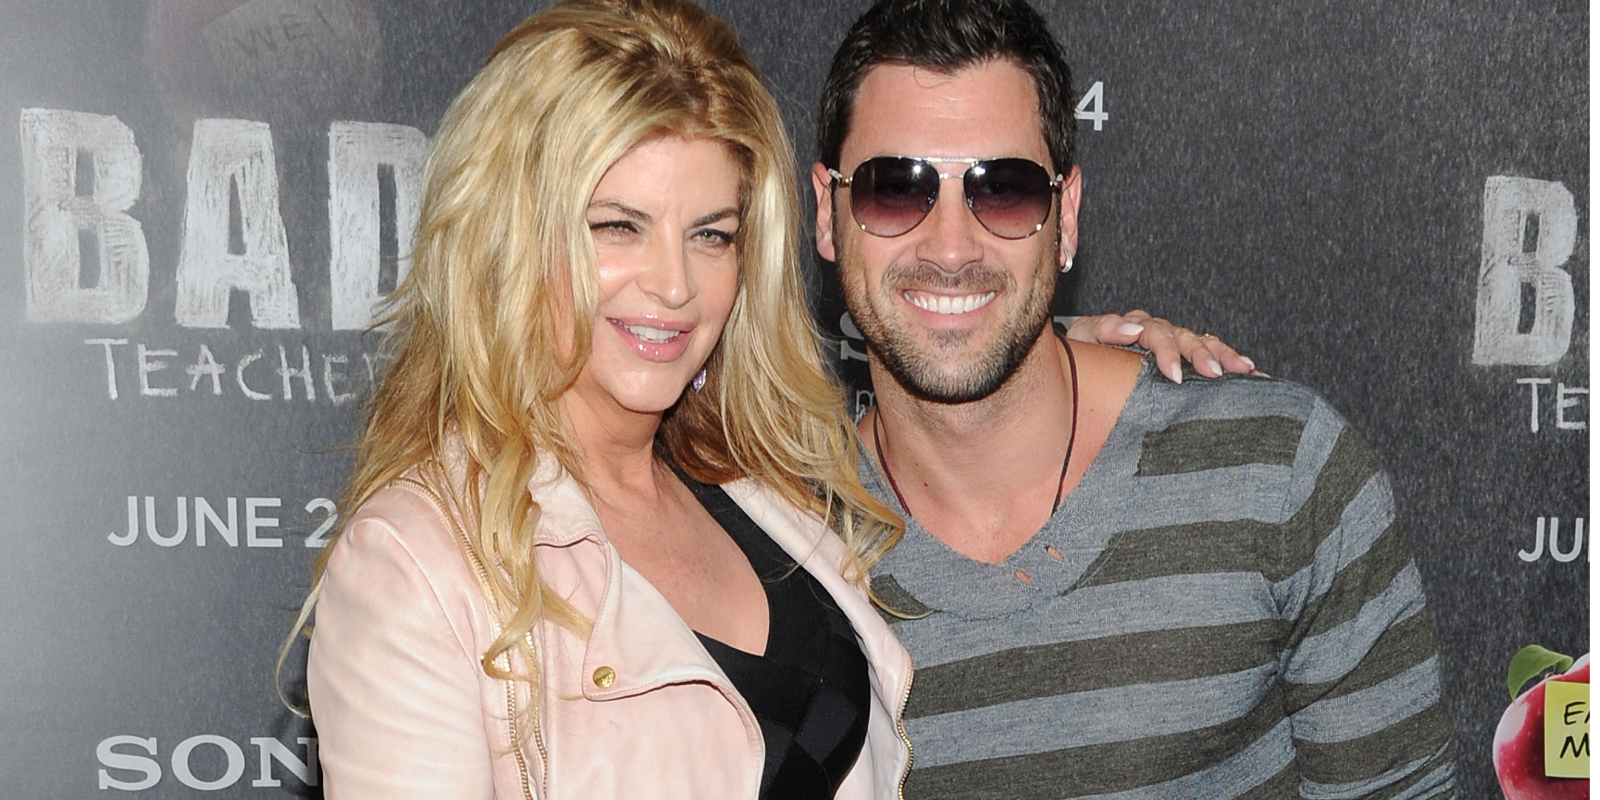 Kirstie Alley and Maks Chmerkovskiy pose on the red carpet for the film premiere of 'Bad Teacher."